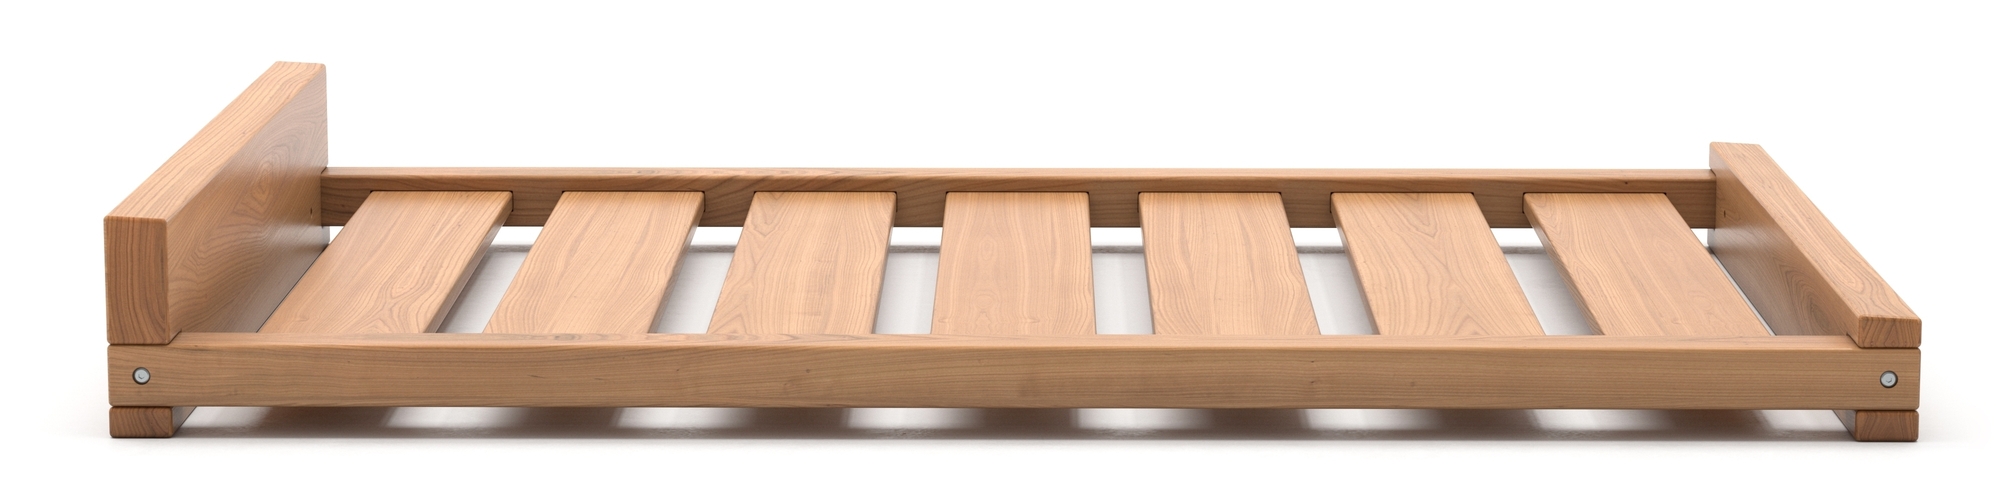 Solid wood Montessori toddler bed